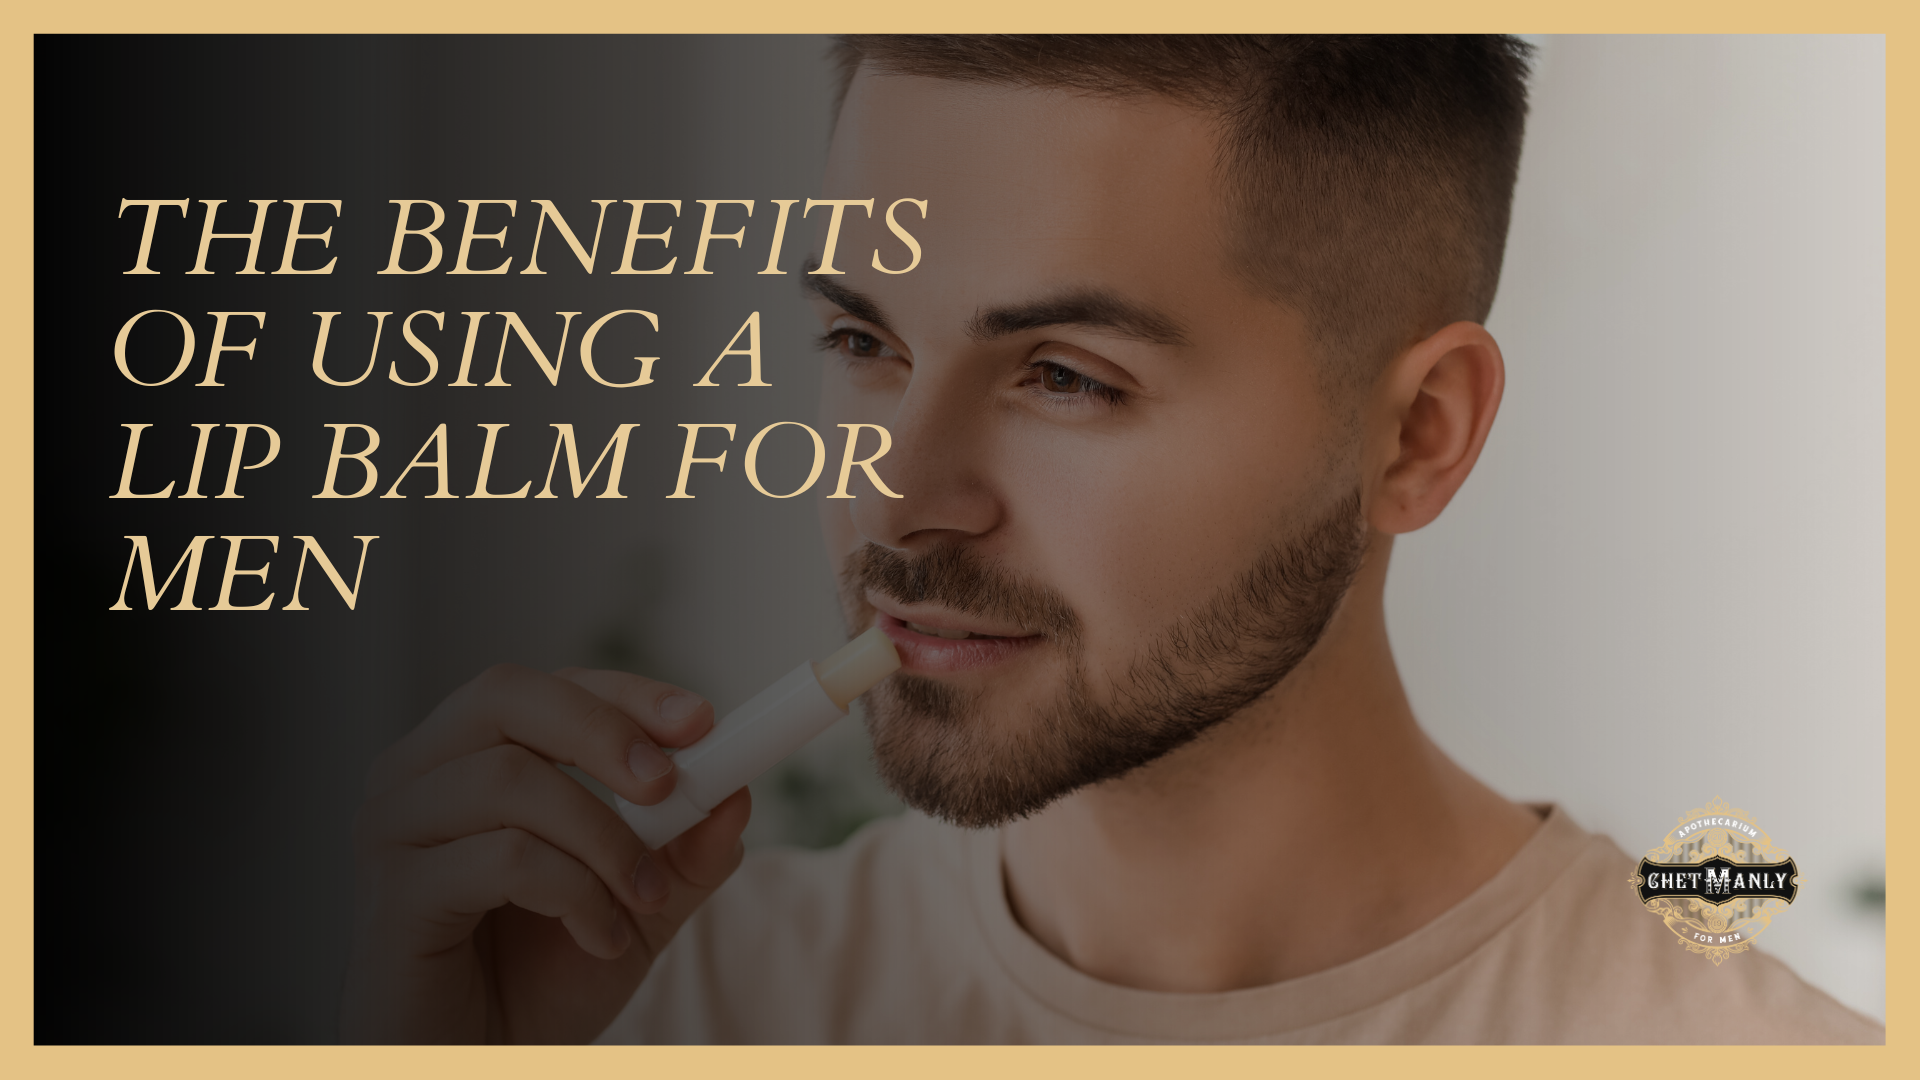 The Benefits of Using a Lip Balm for Men